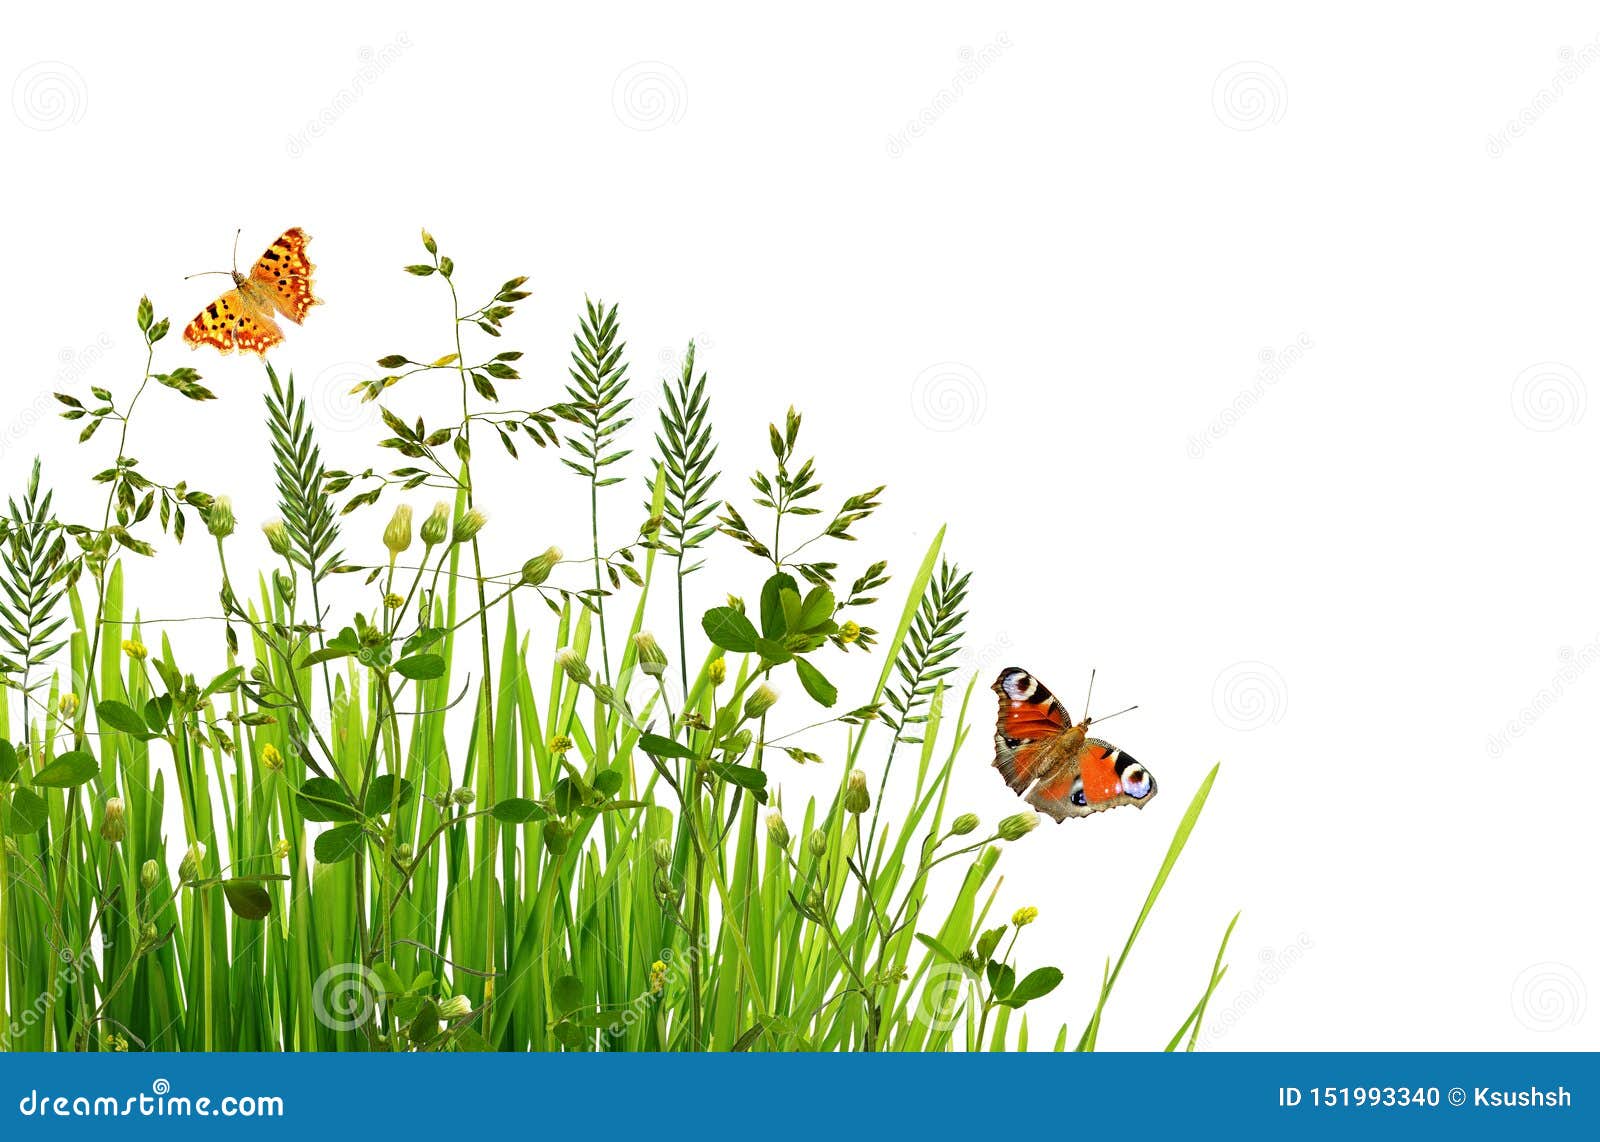 Wild Green Grass and Butterflies Stock Photo - Image of bloom, background:  151993340